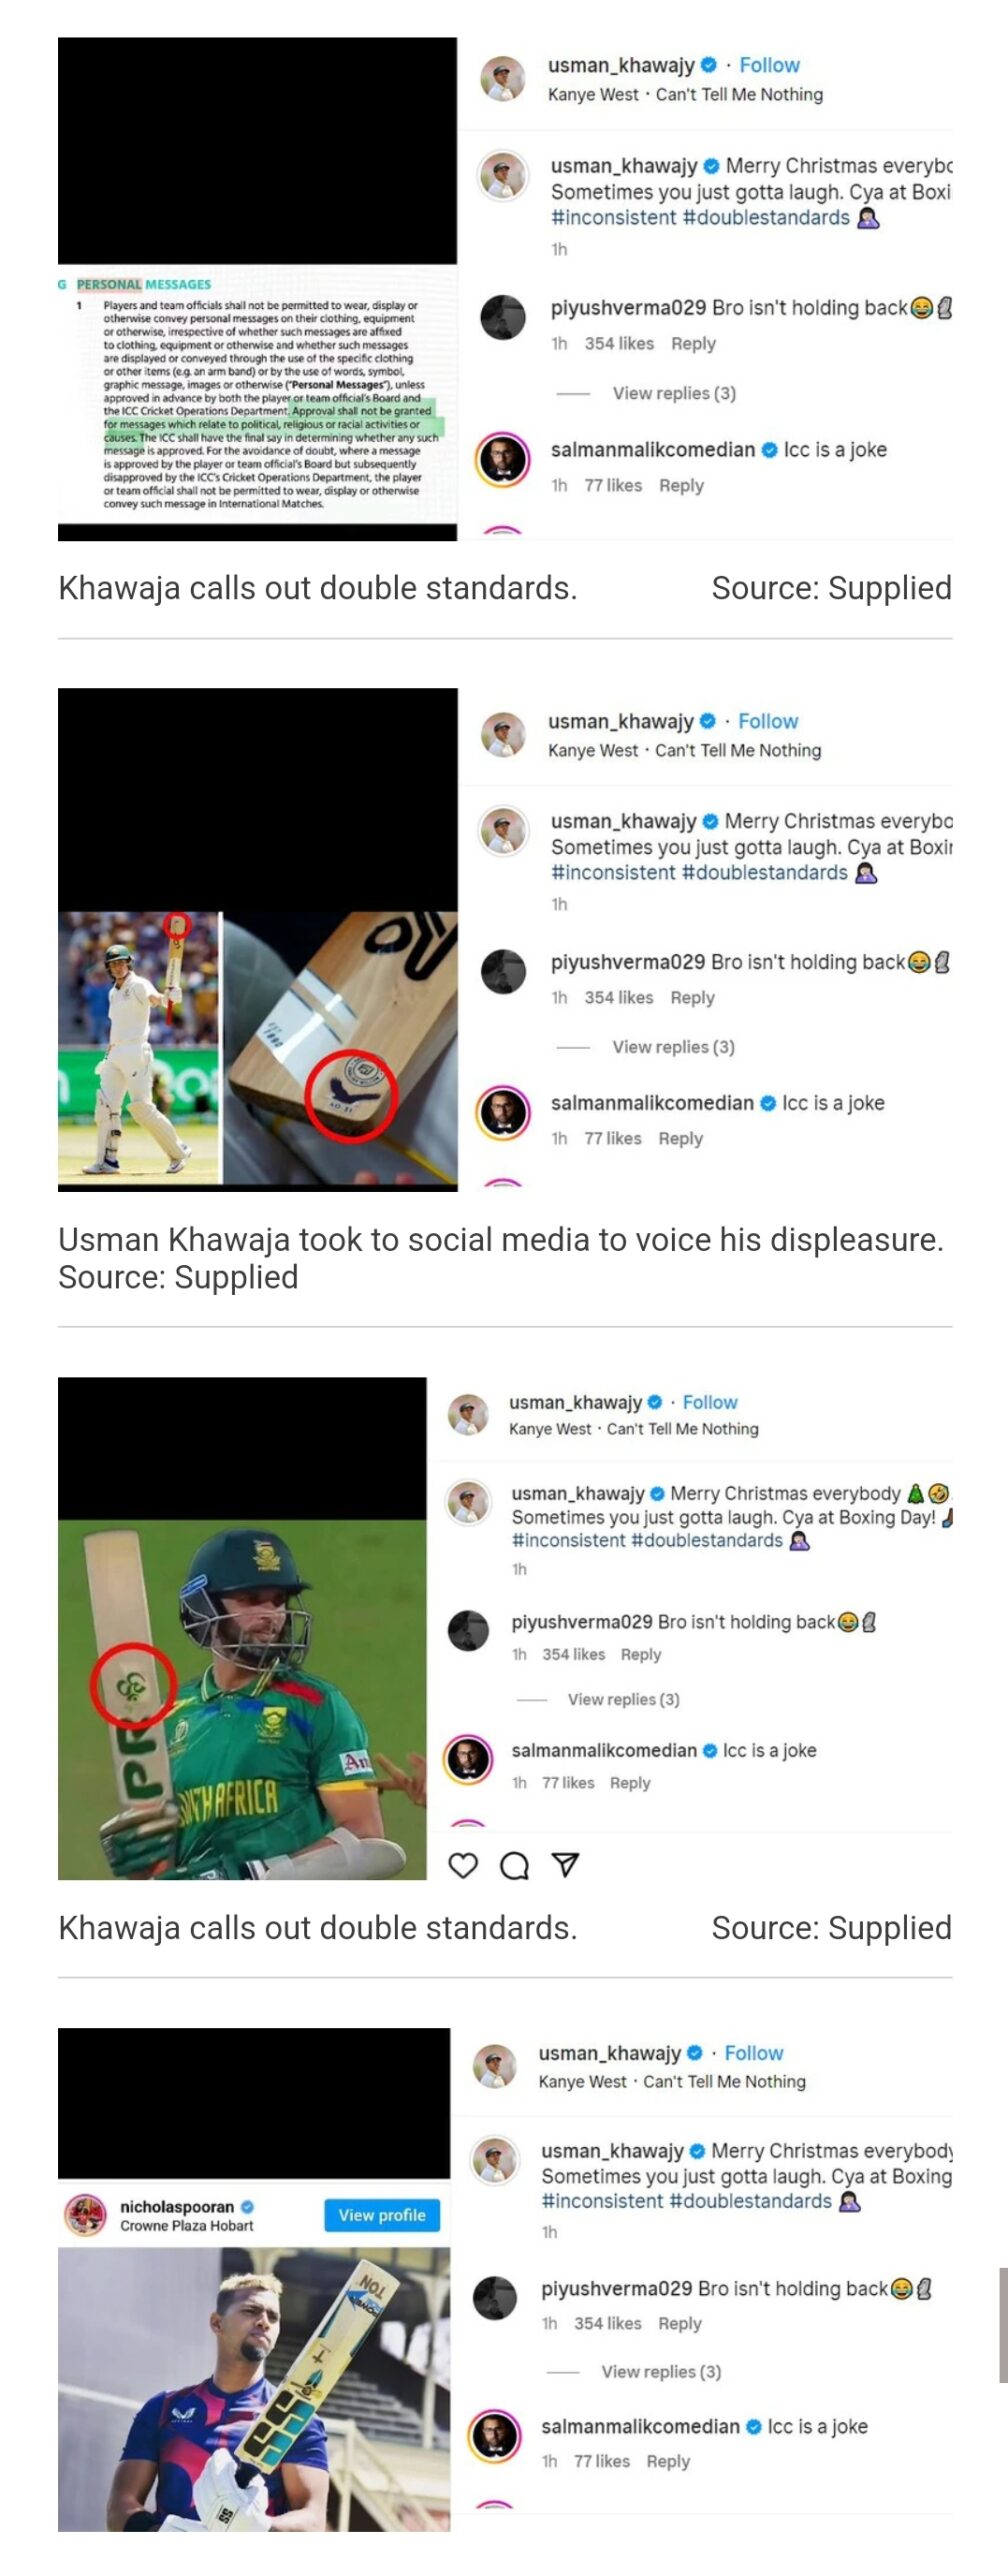 Usman Khawaja Challenges ICC on Alleged 'Double Standards' in Social Media Post